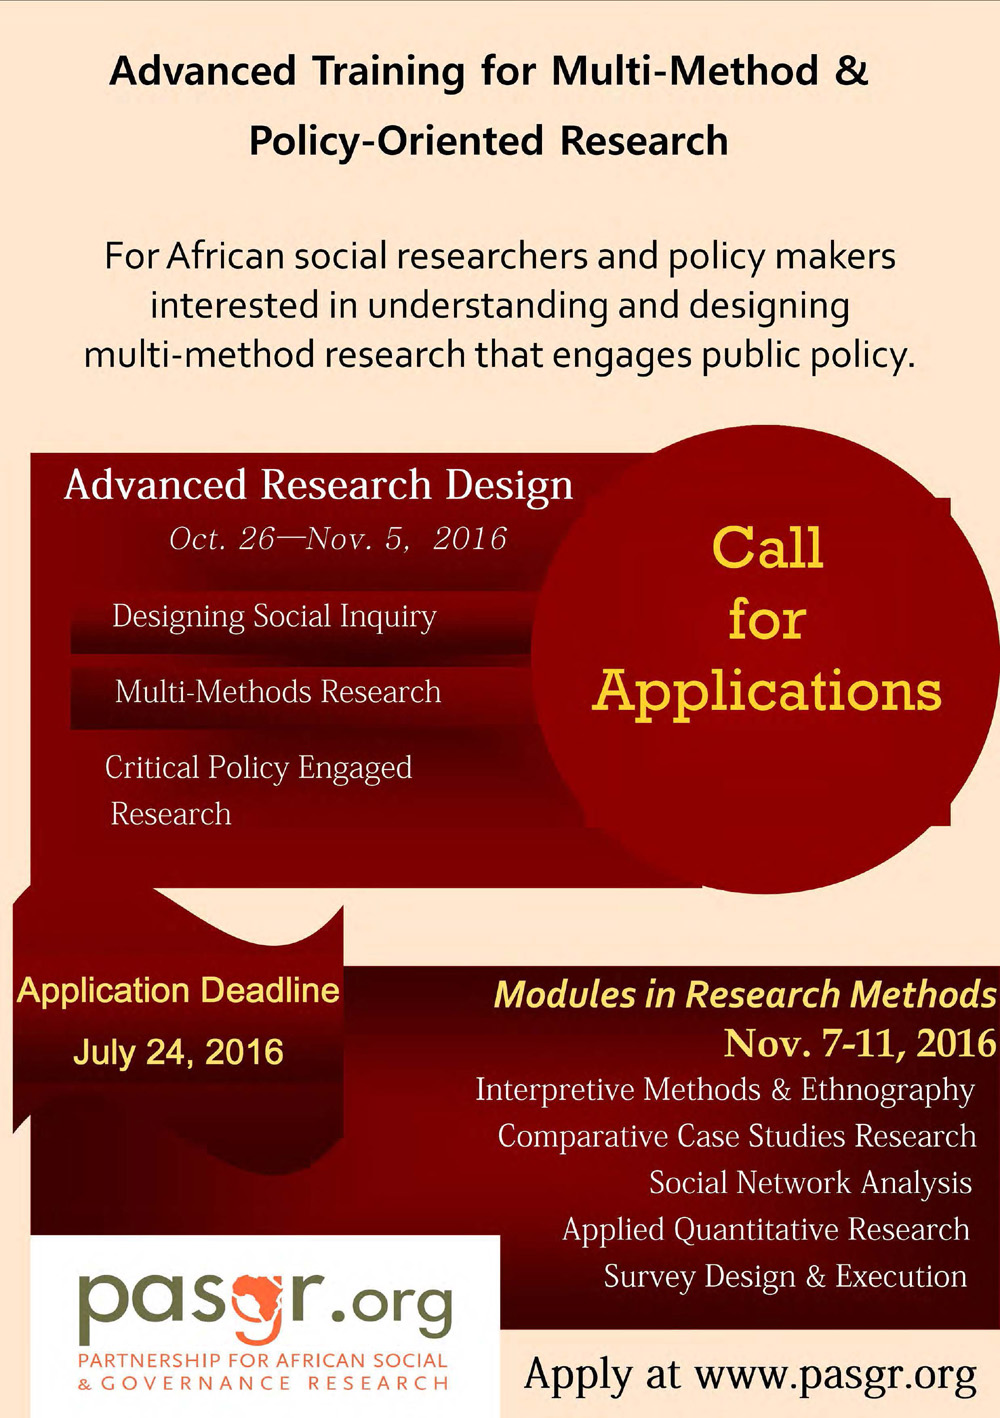  Call for Applications - Advanced Training for Multi-Method & Policy-Oriented Research